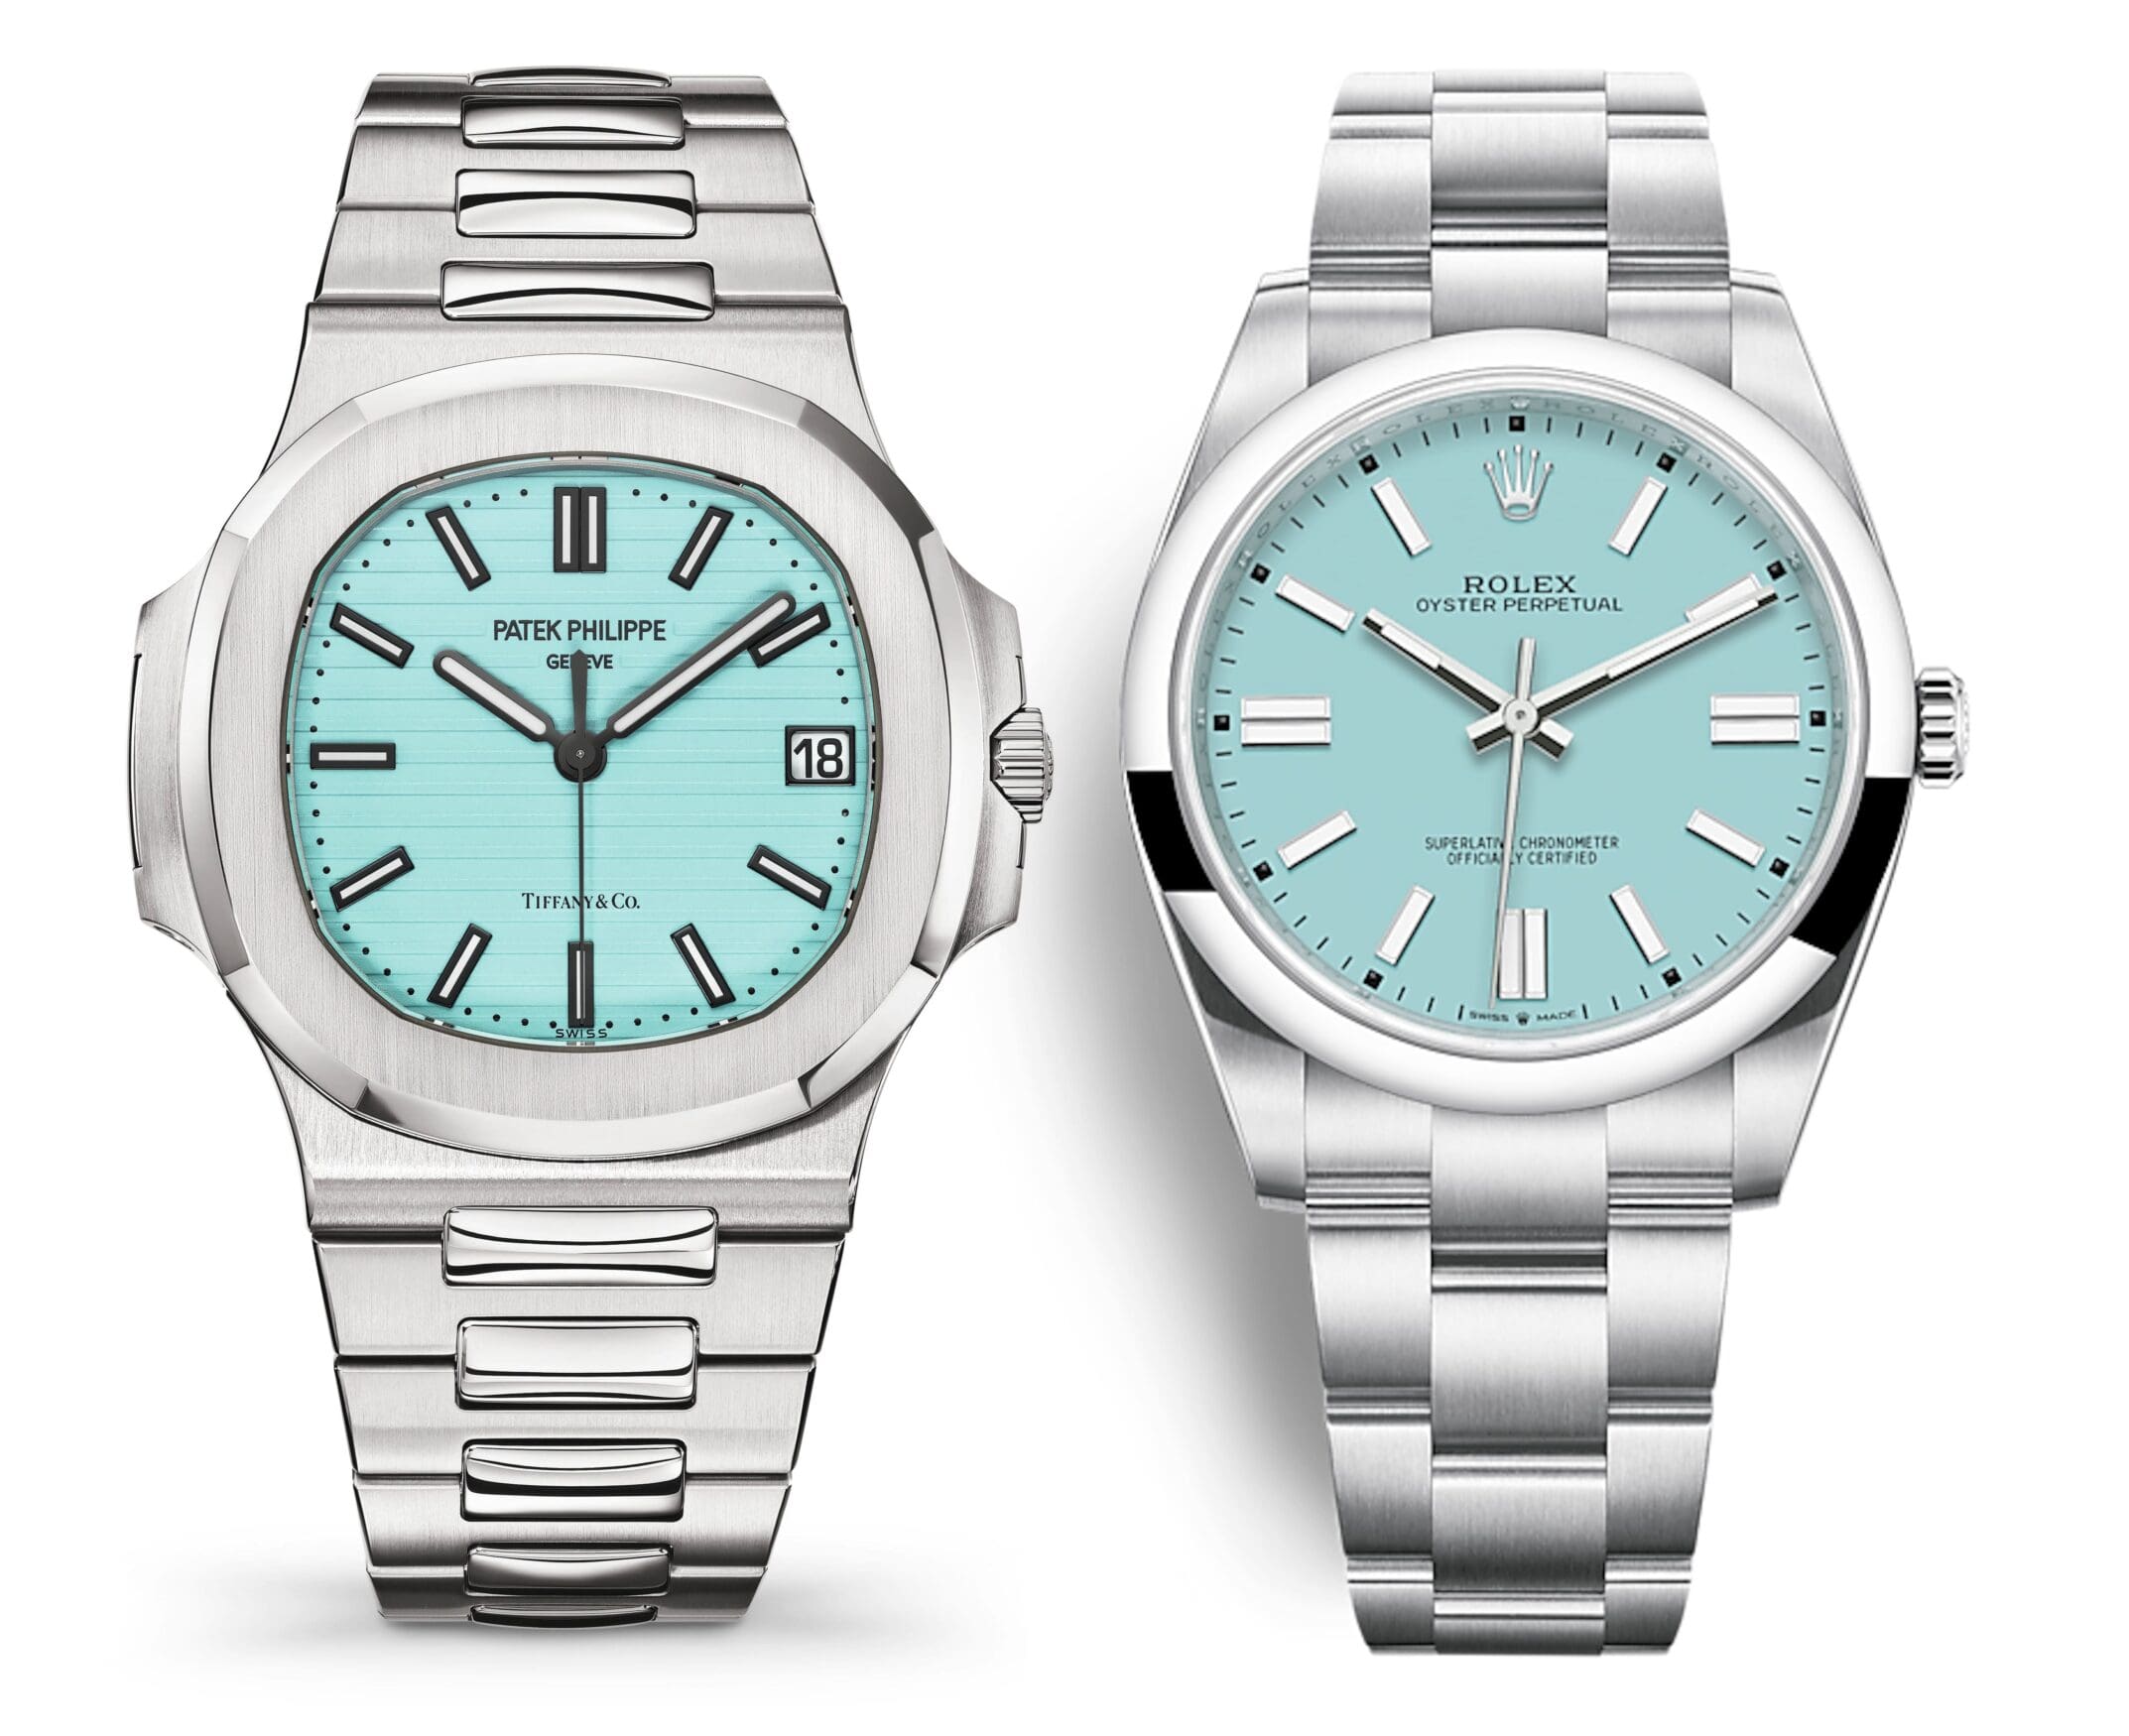 Four unexpected takeaways from the new Tiffany Blue 5711 – the real final victory lap of Patek’s Nautilus